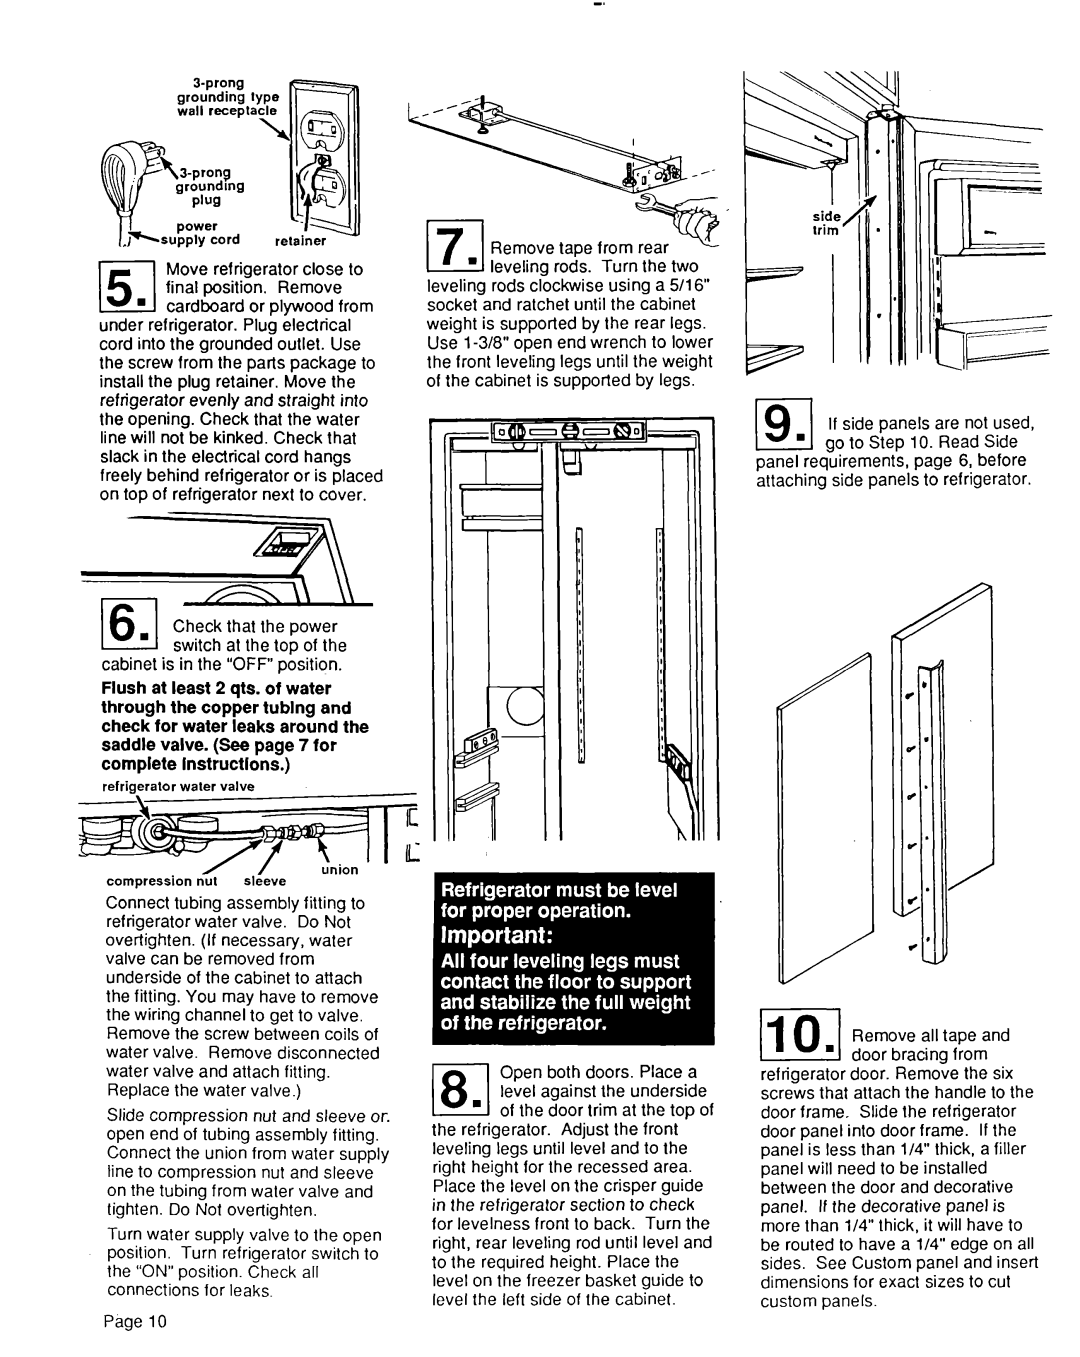 KitchenAid S-302 installation instructions Check that the power switch at the top of the 